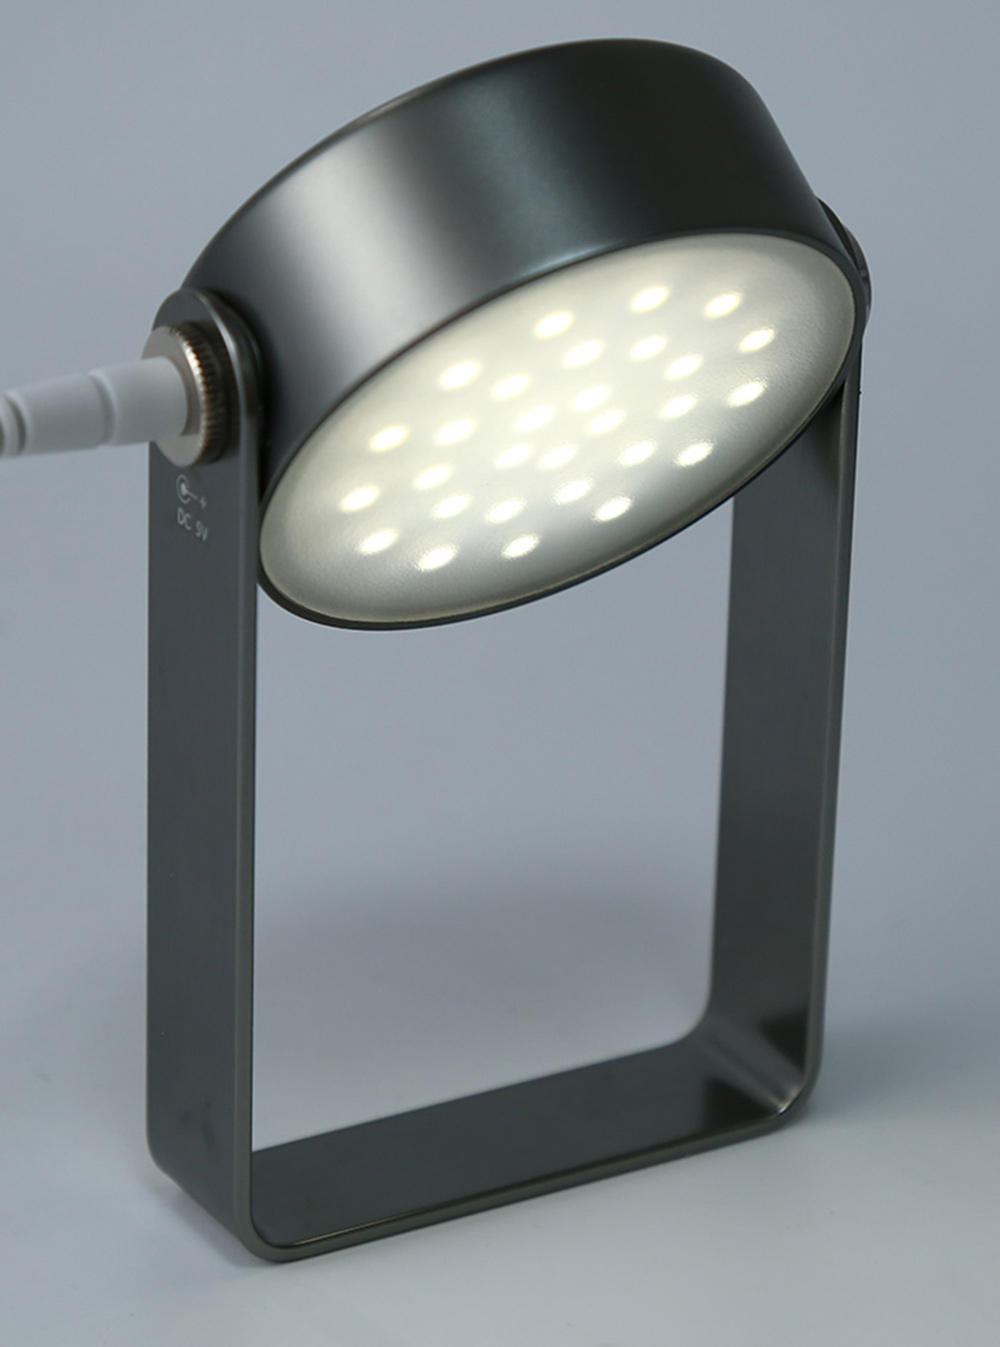 2W 29 LEDs Outdoor Multi-functional Waterproof LED Light Desk Lamp with USB Charging Port